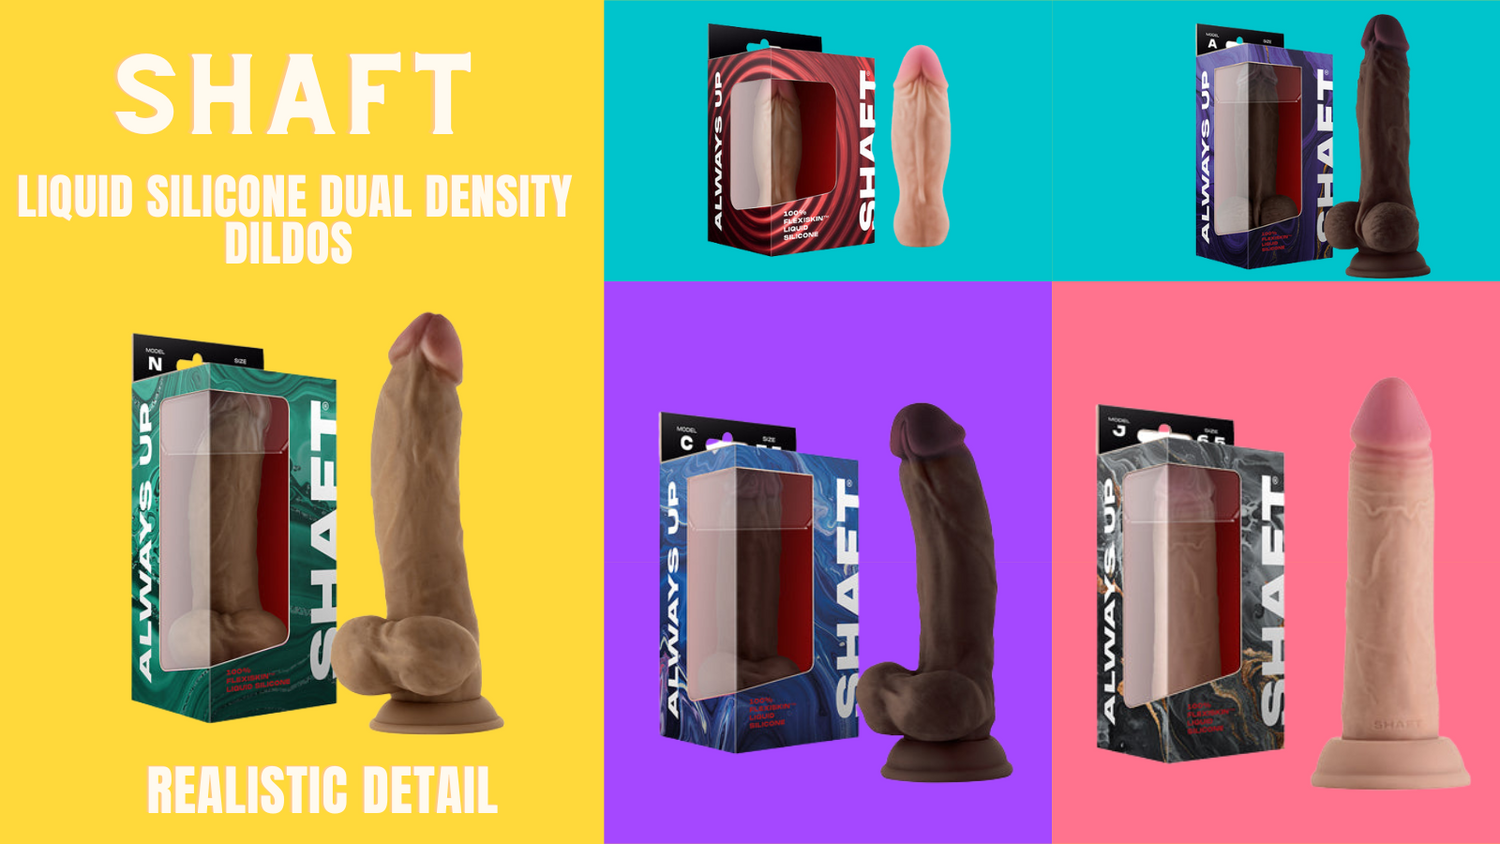 Shaft dual density silicone realistic dildos. soft silicone feel, suction cup harness capabilities 